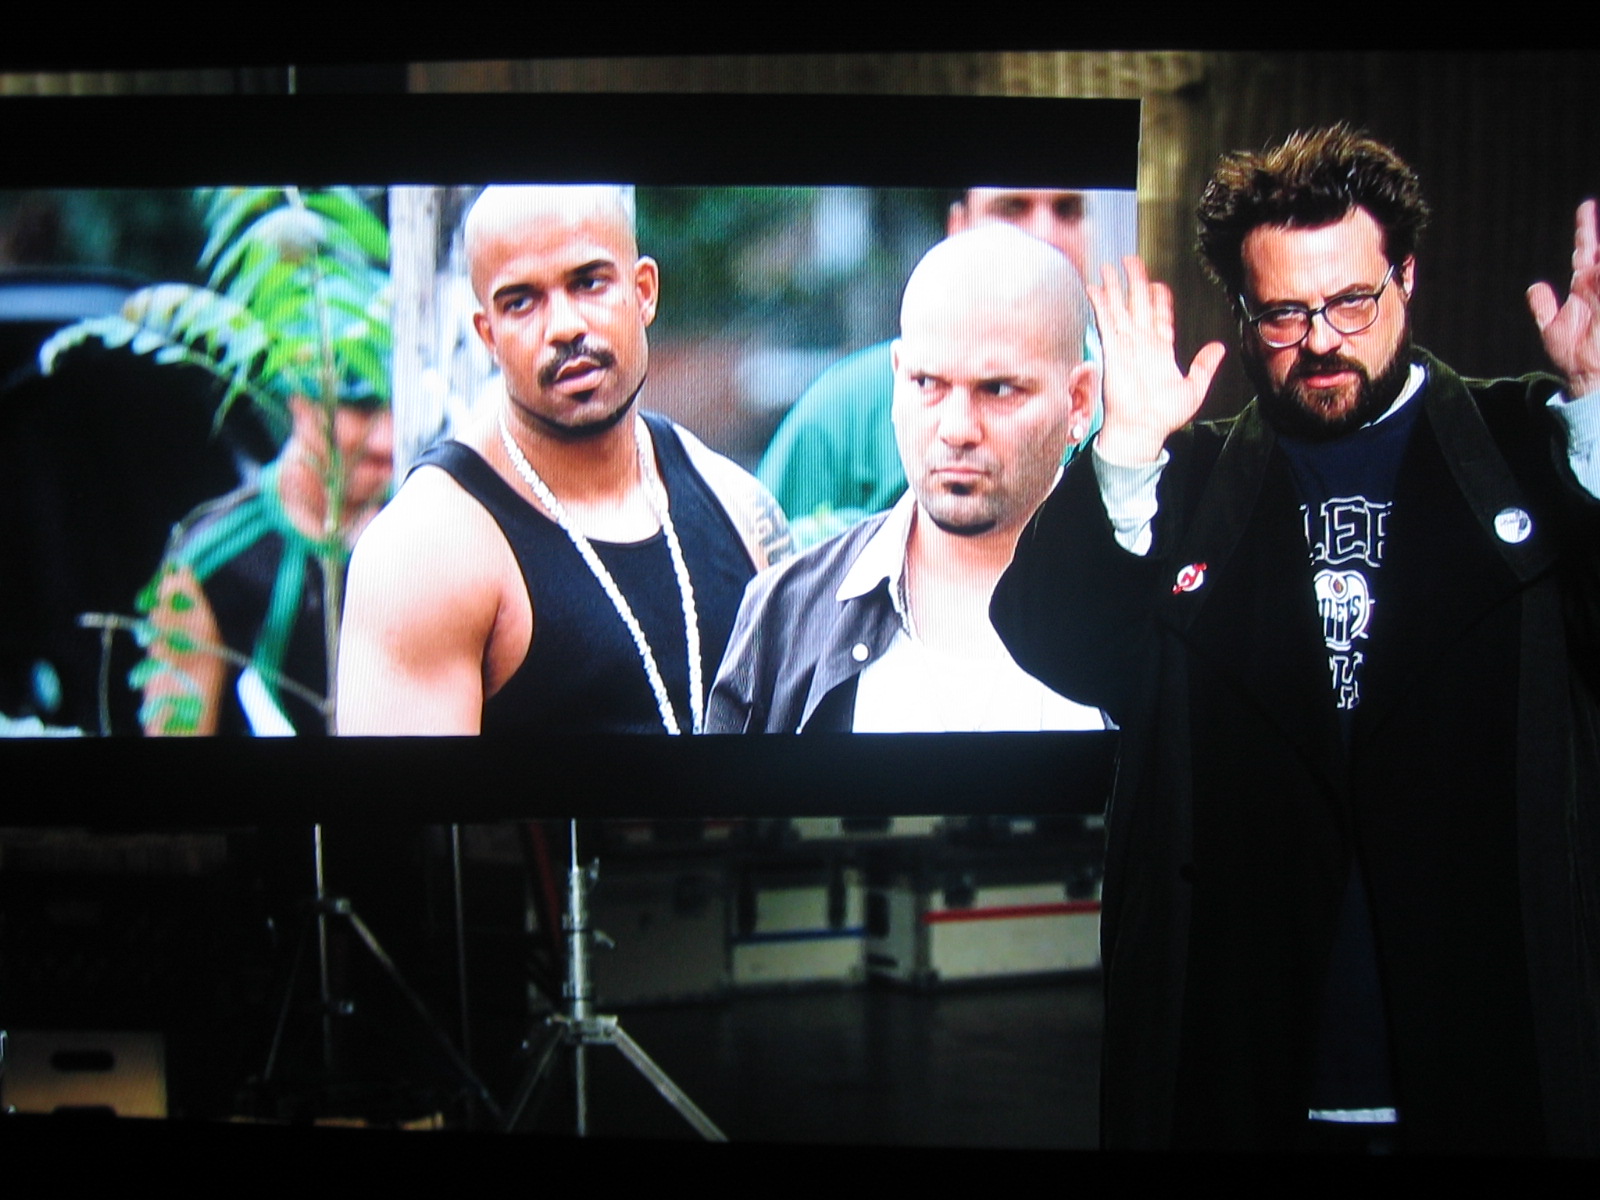 Still of Jeremy Dash, Guillermo Diaz, and director Kevin Smith from Cop Out on Blu-Ray extra features